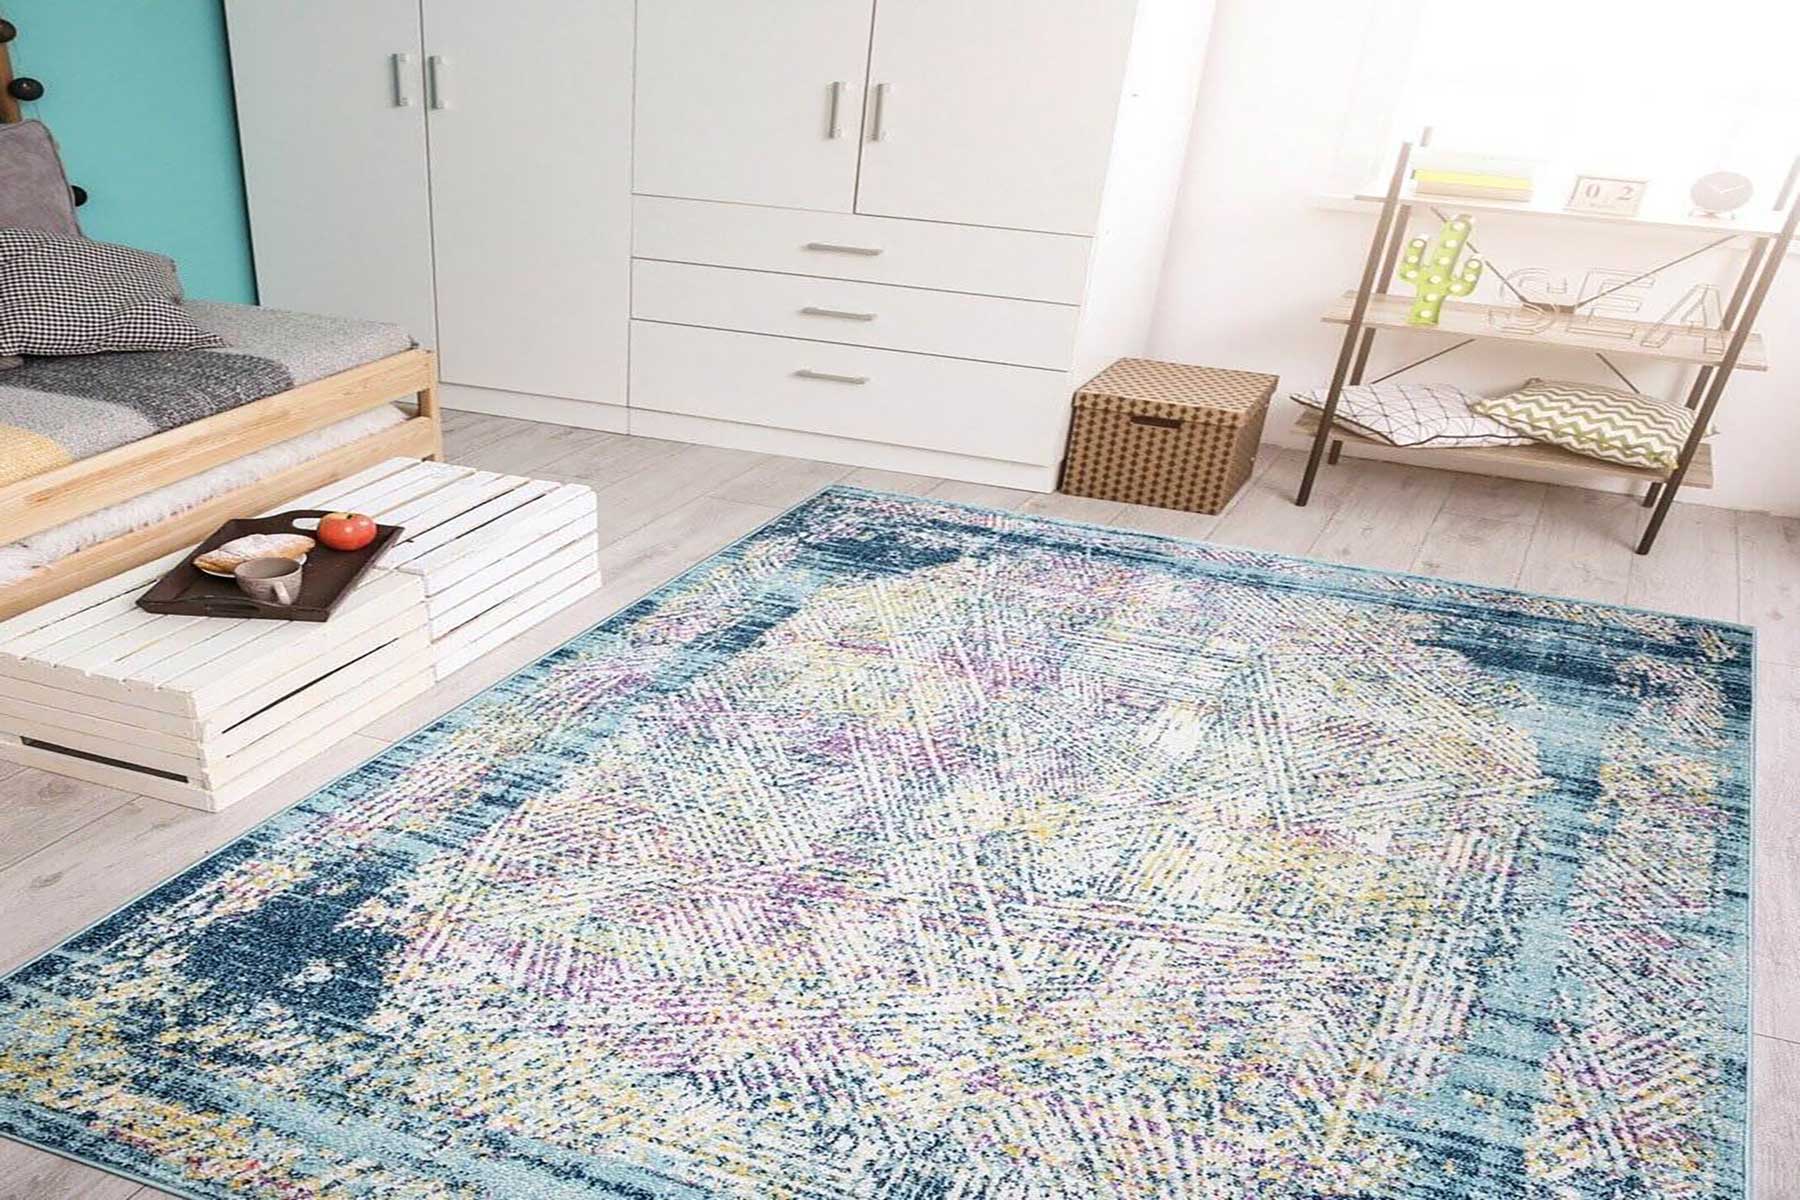 benefits of layering rugs in bedroom www.homelooks.com